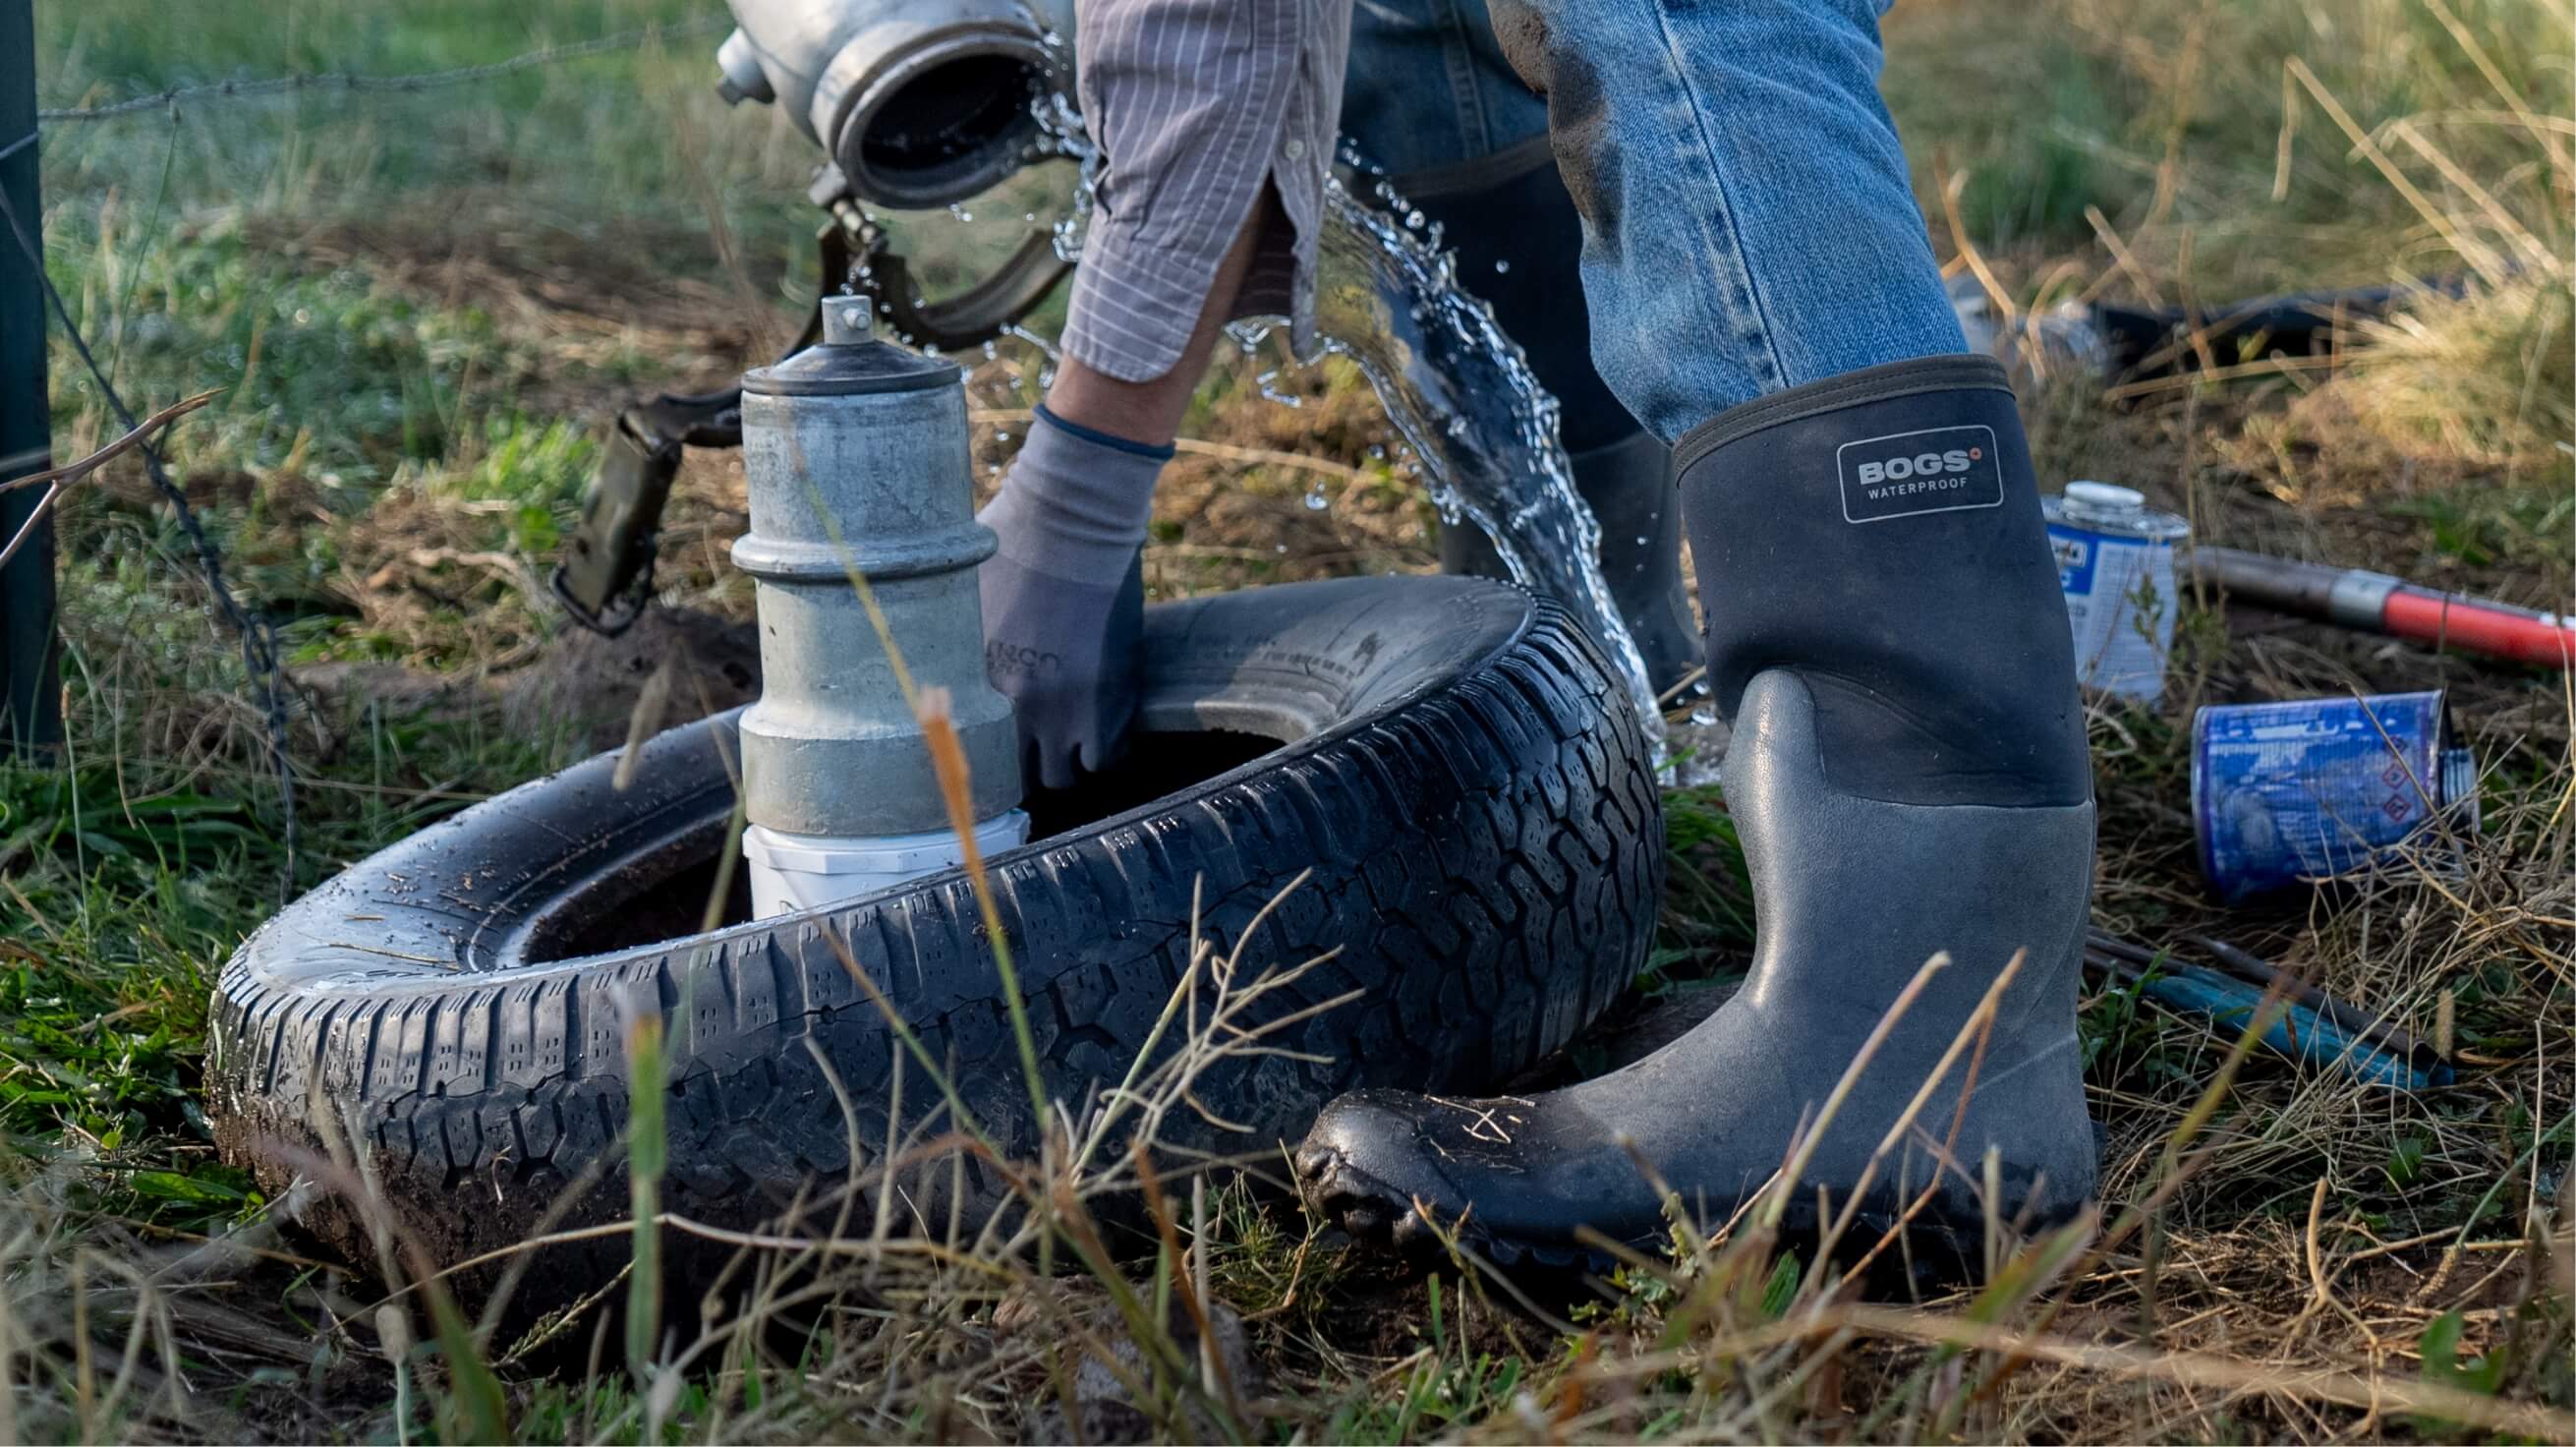 Shop the Men's Mesa Tall Soft Toe waterproof farm & work boots. The featured product is the Men's Mesa Tall Soft Toe in black.